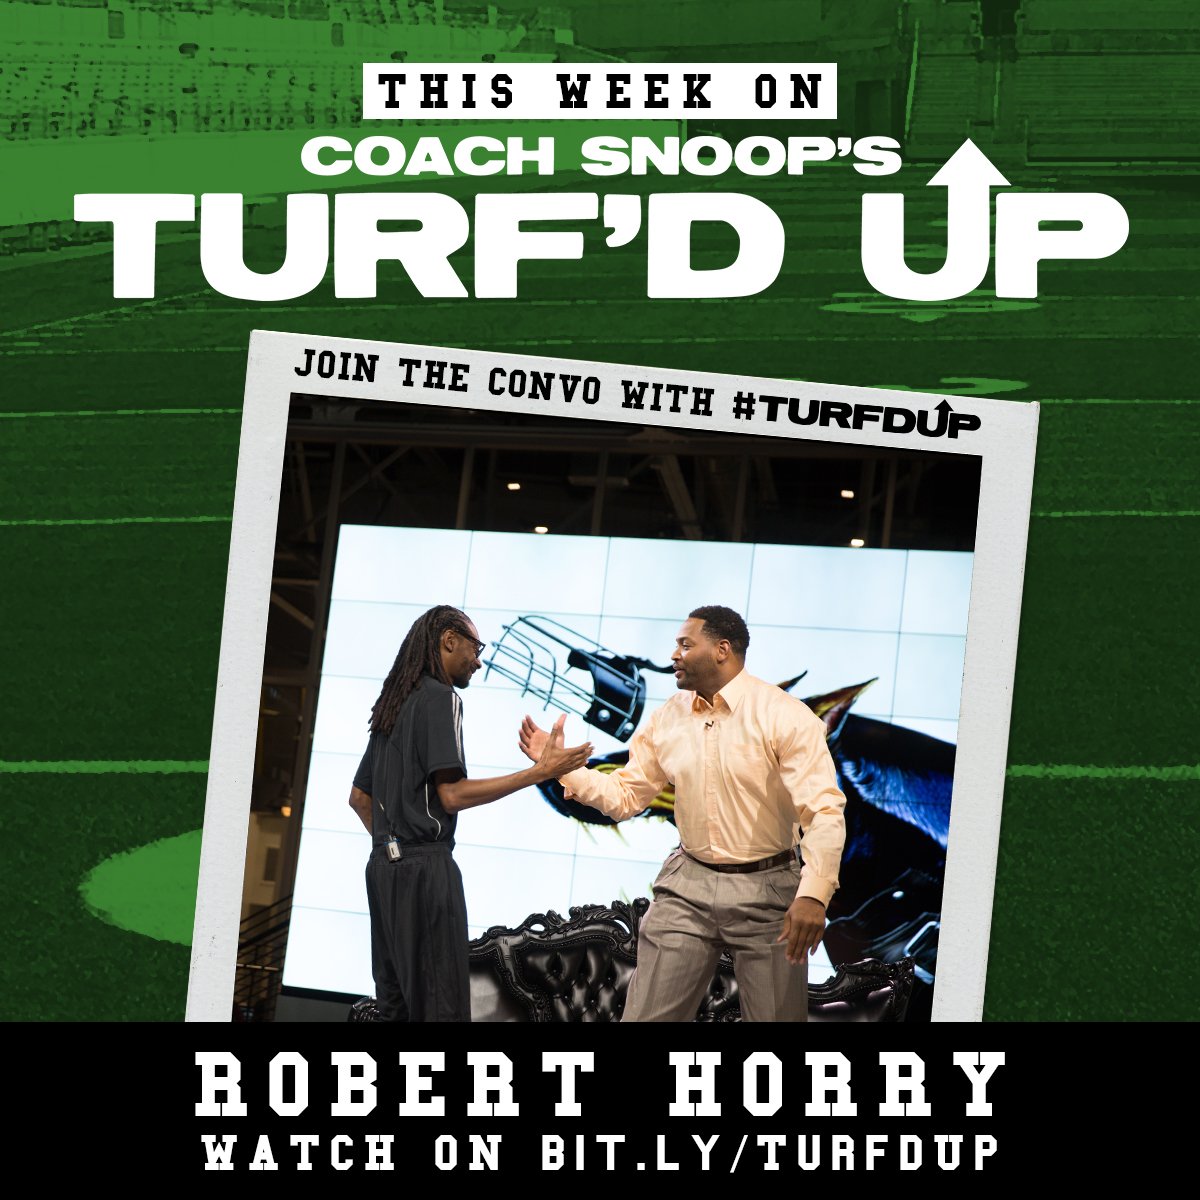 abt to have my man @rkhorry on #TurfdUp tune in https://t.co/LS7few7Cmf @adidasfballus https://t.co/dWgD7VRLpq